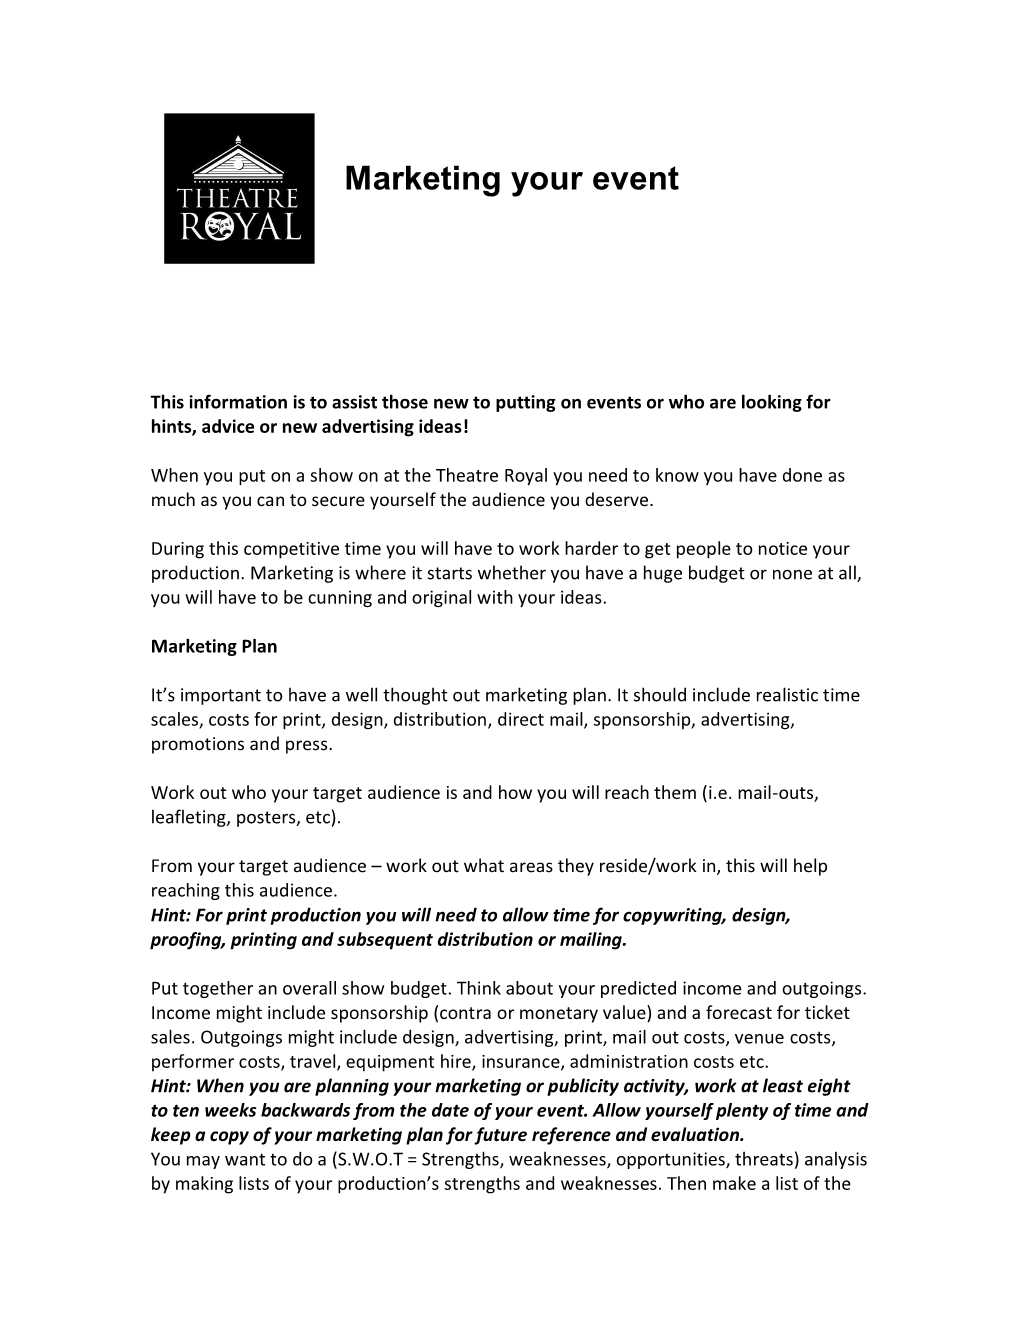 Marketing Your Event